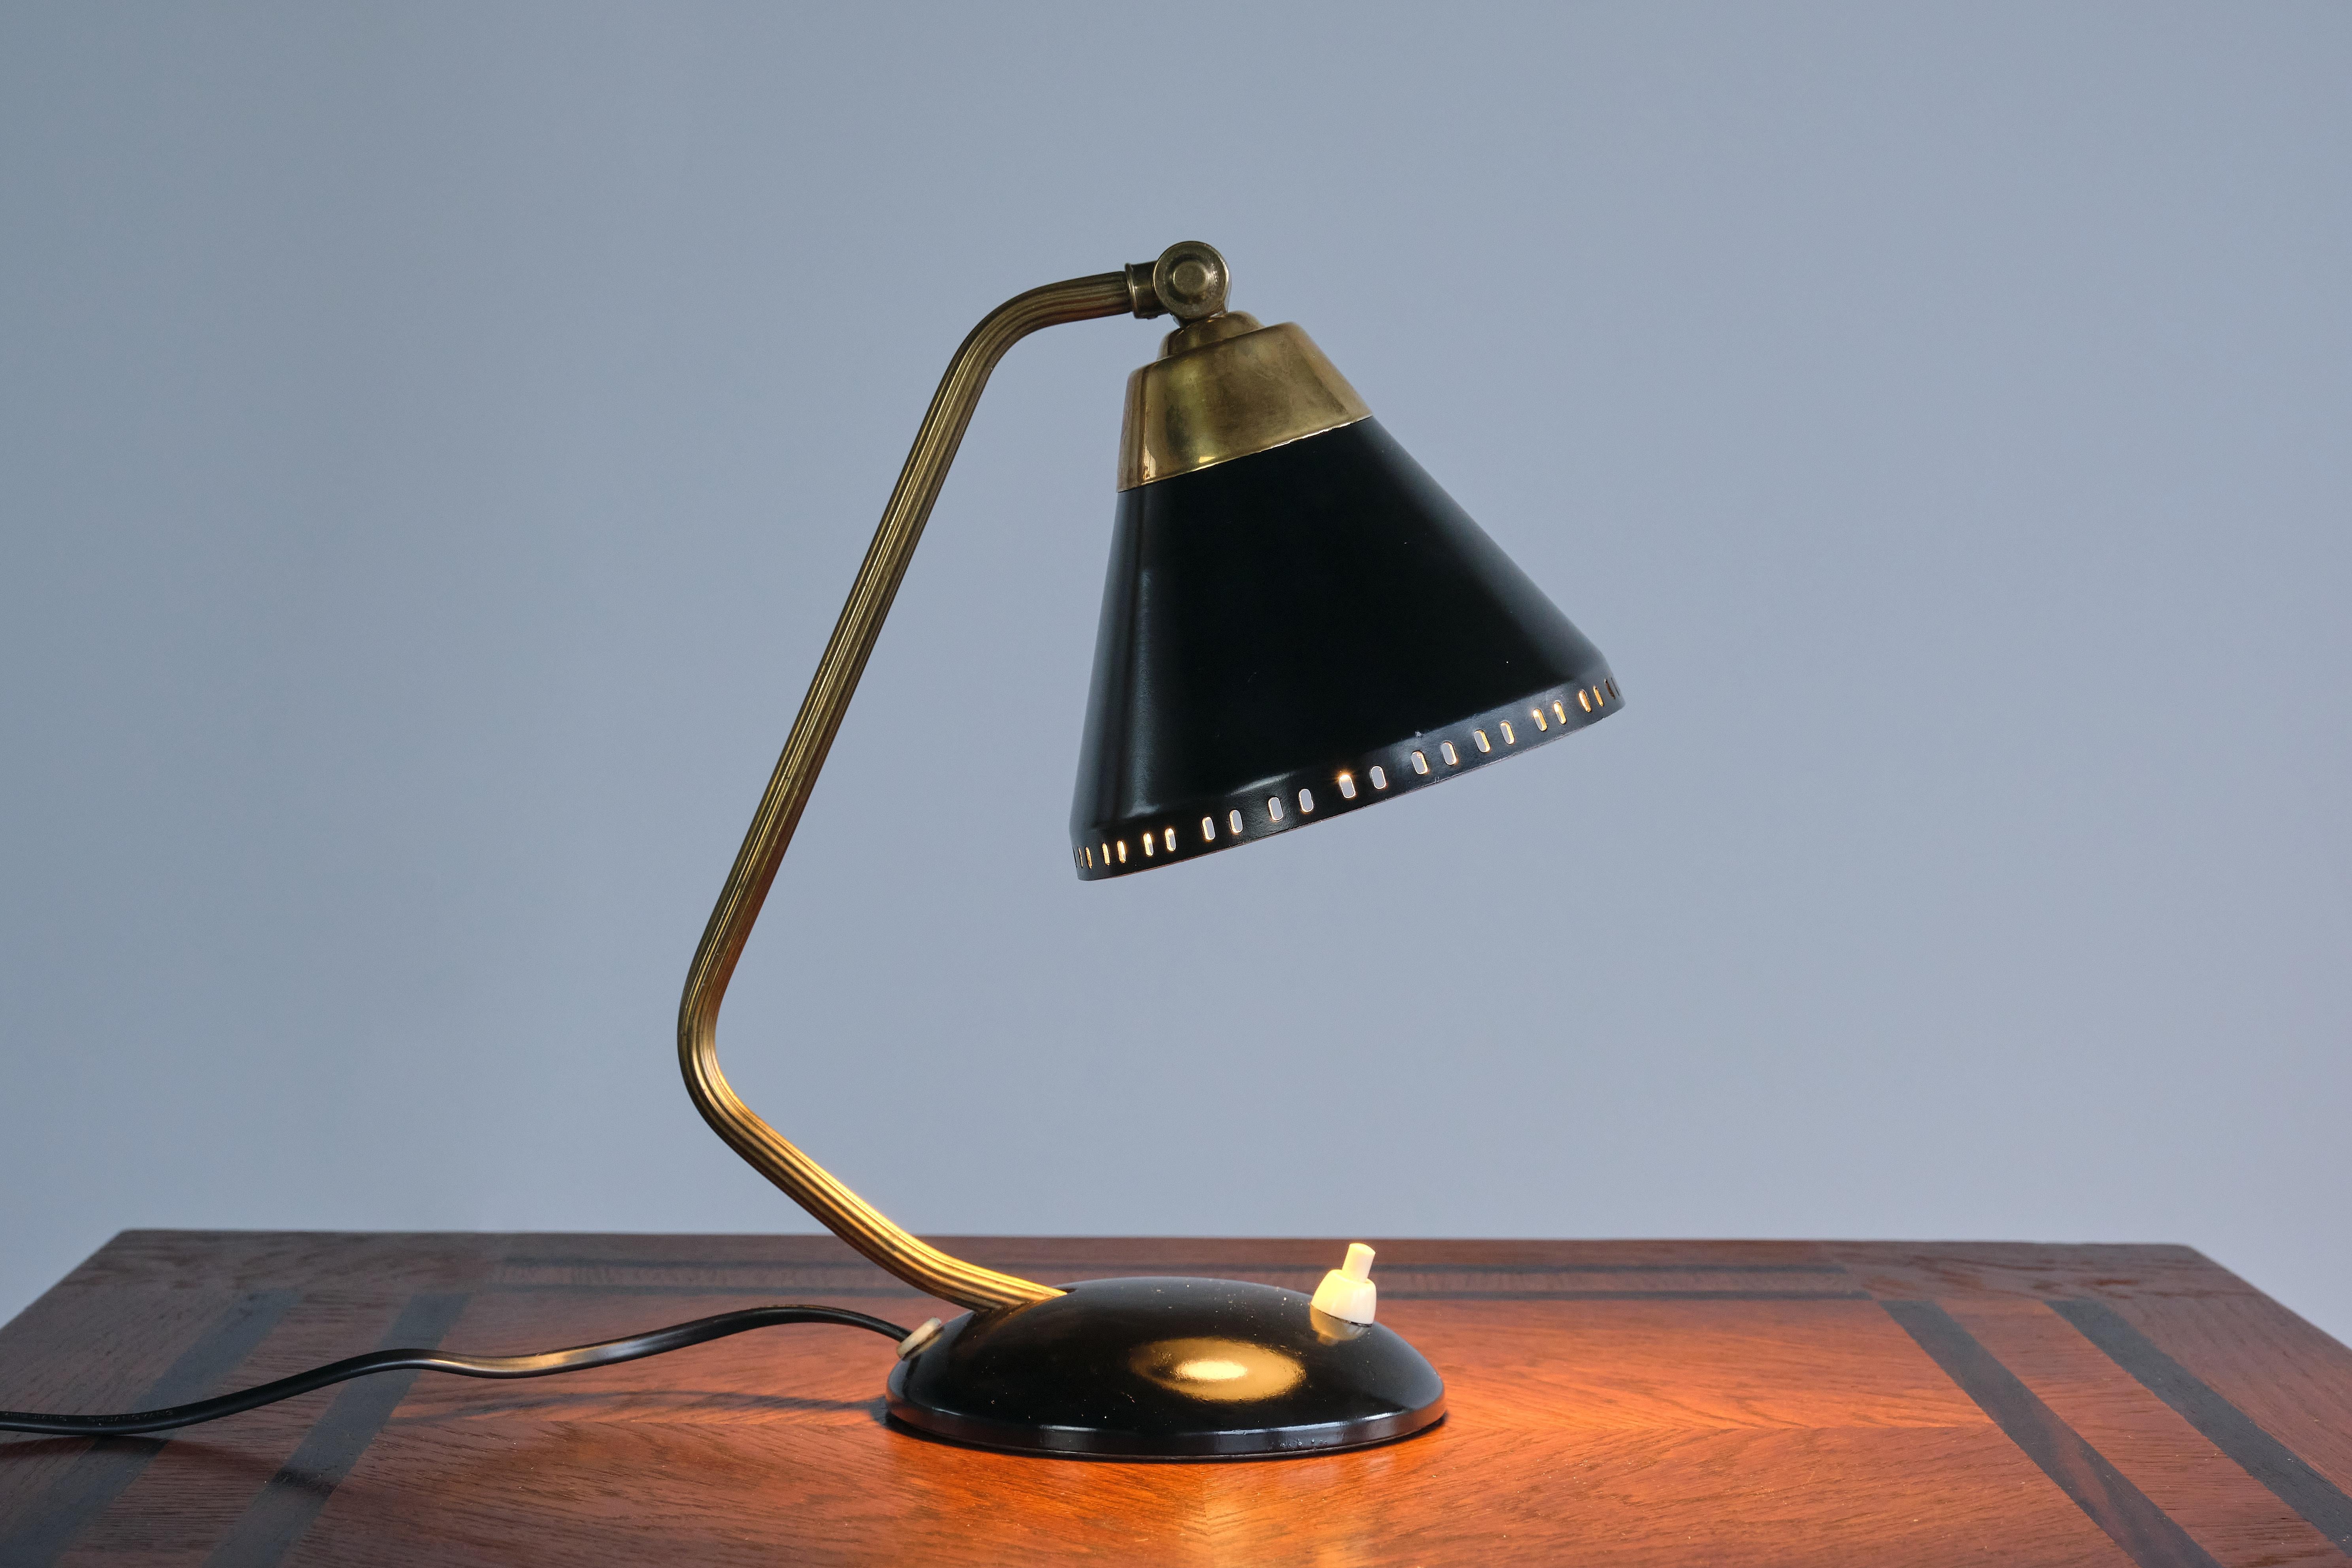 This rare table or desk lamp was designed by Erik Wärnå in the 1950s. It was produced by his company EWÅ in Värnamo, Sweden. The lamp is signed with the manufacturers stamp on the underside.

This Swedish Modern design is marked by the rounded base